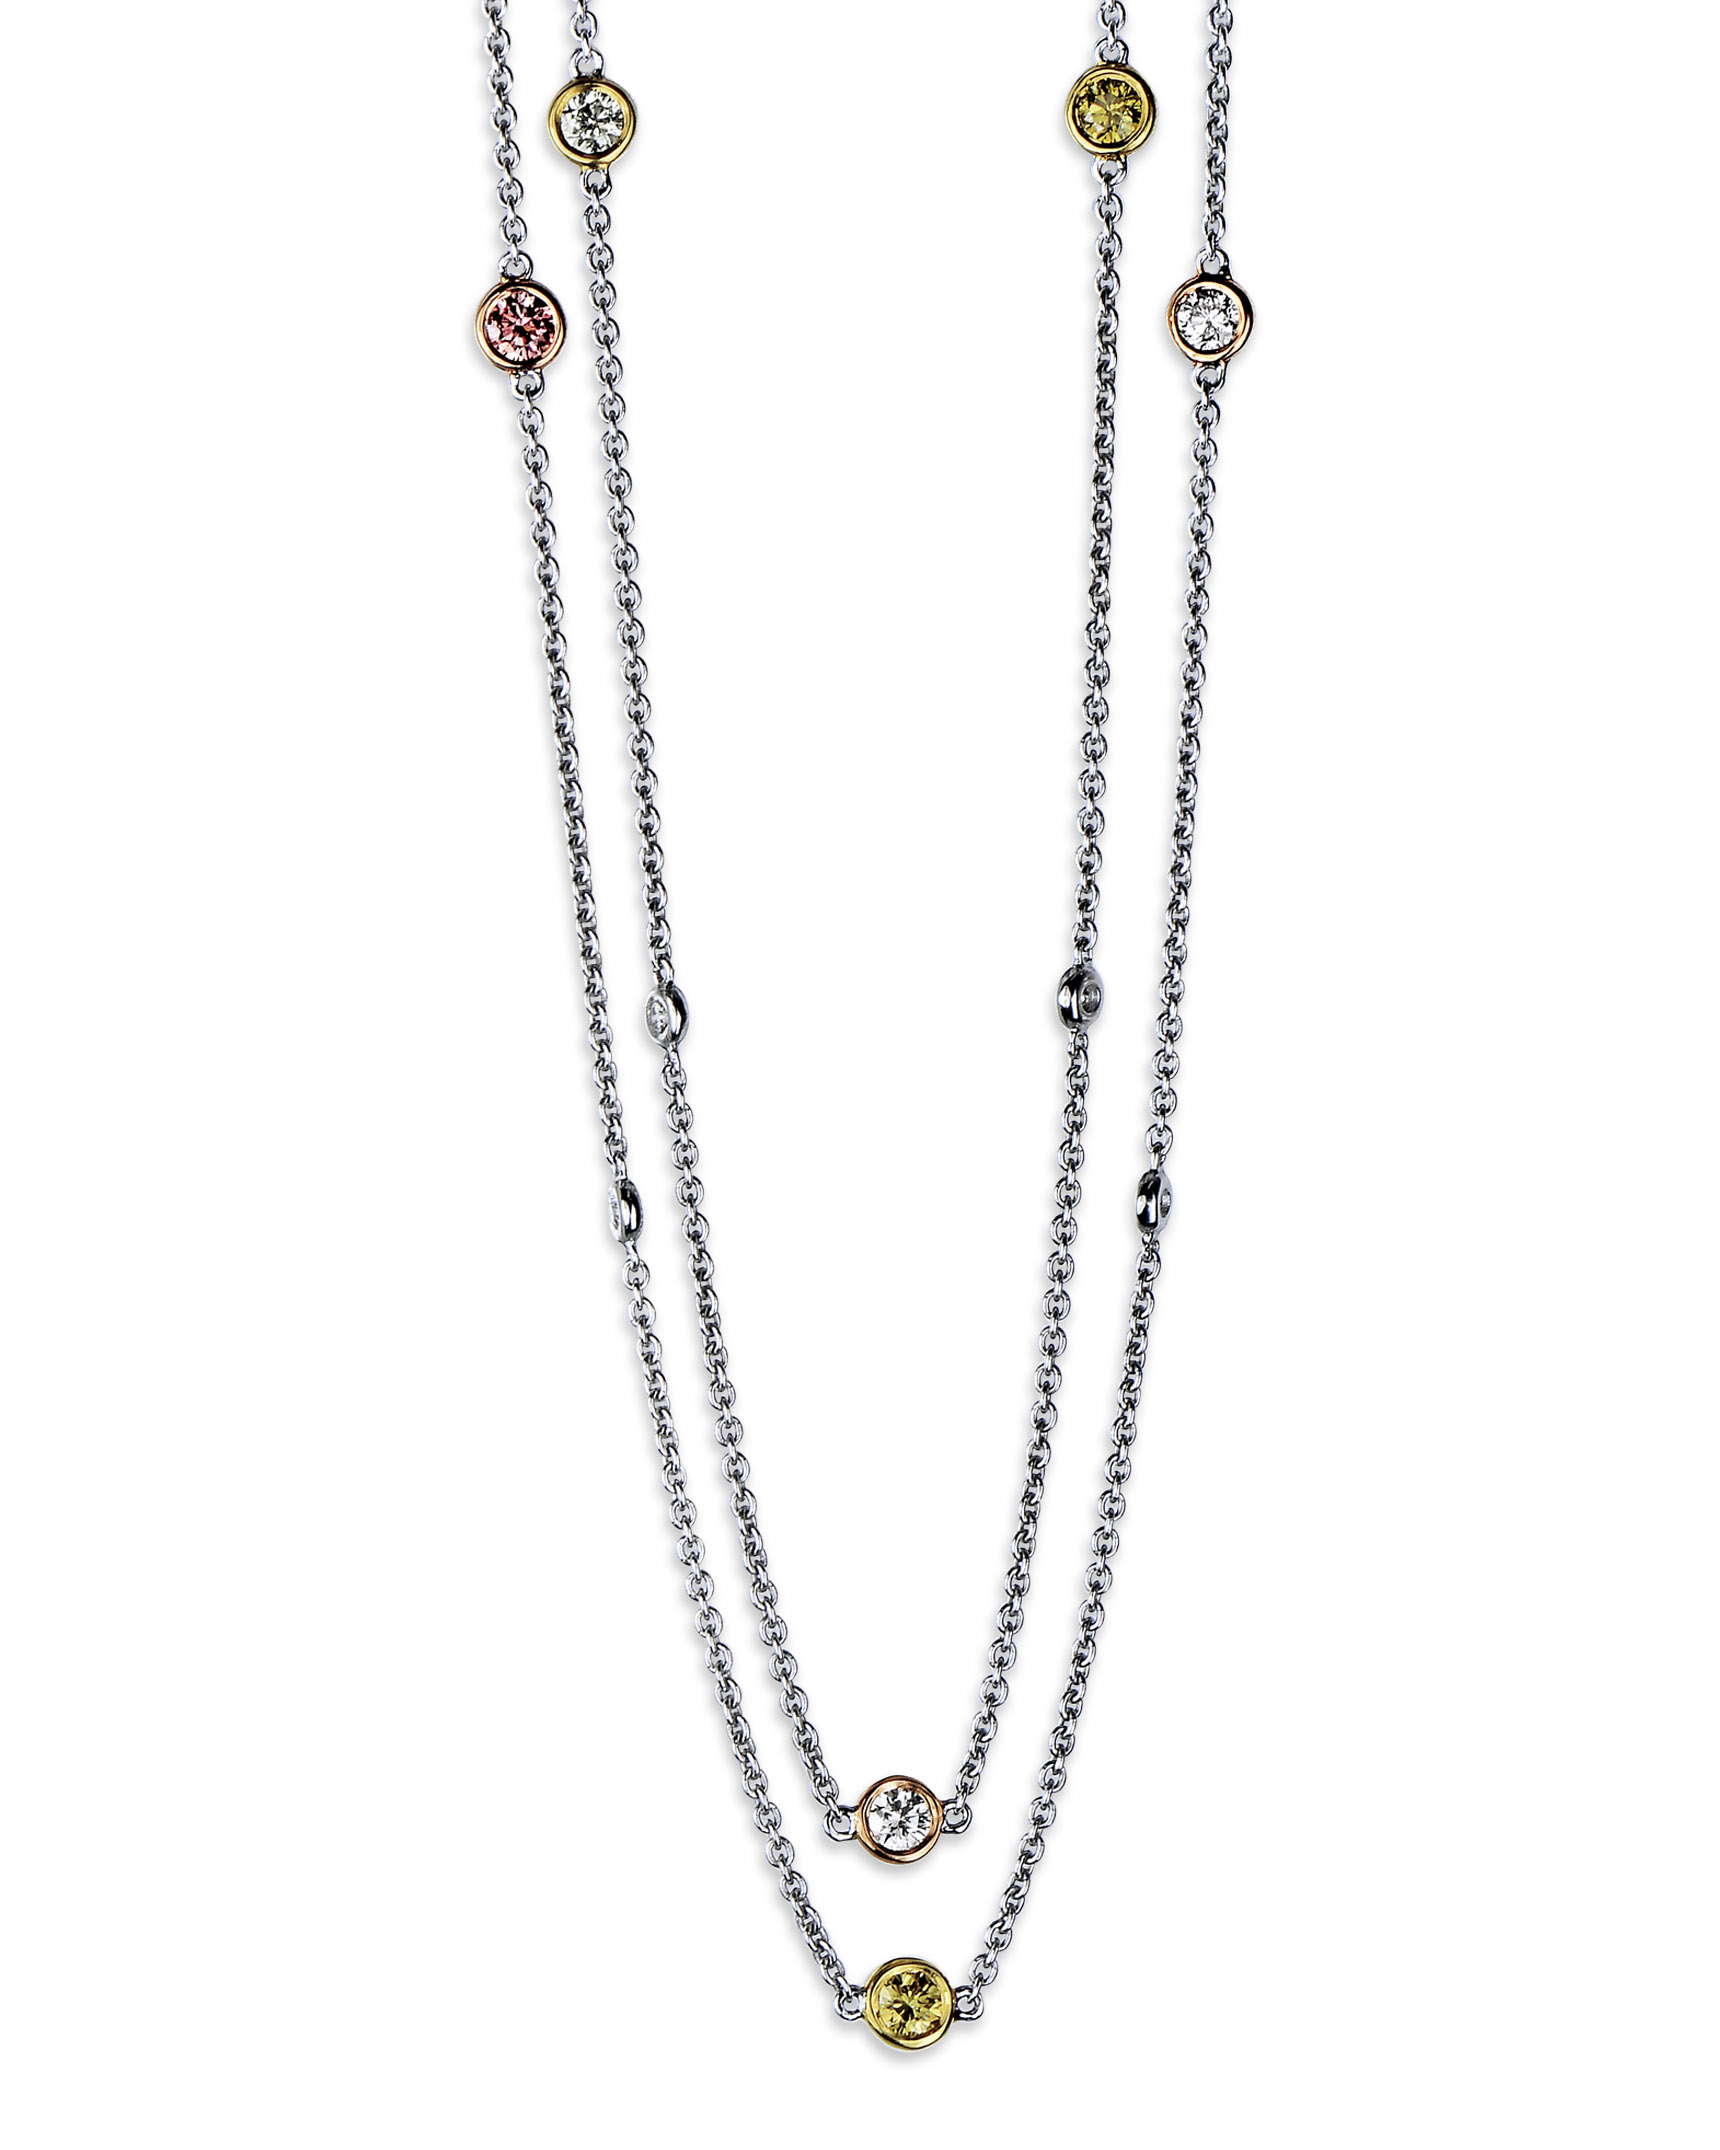 Fancy Colored Diamonds by the Yard Gold Chain Necklace - Turgeon Raine